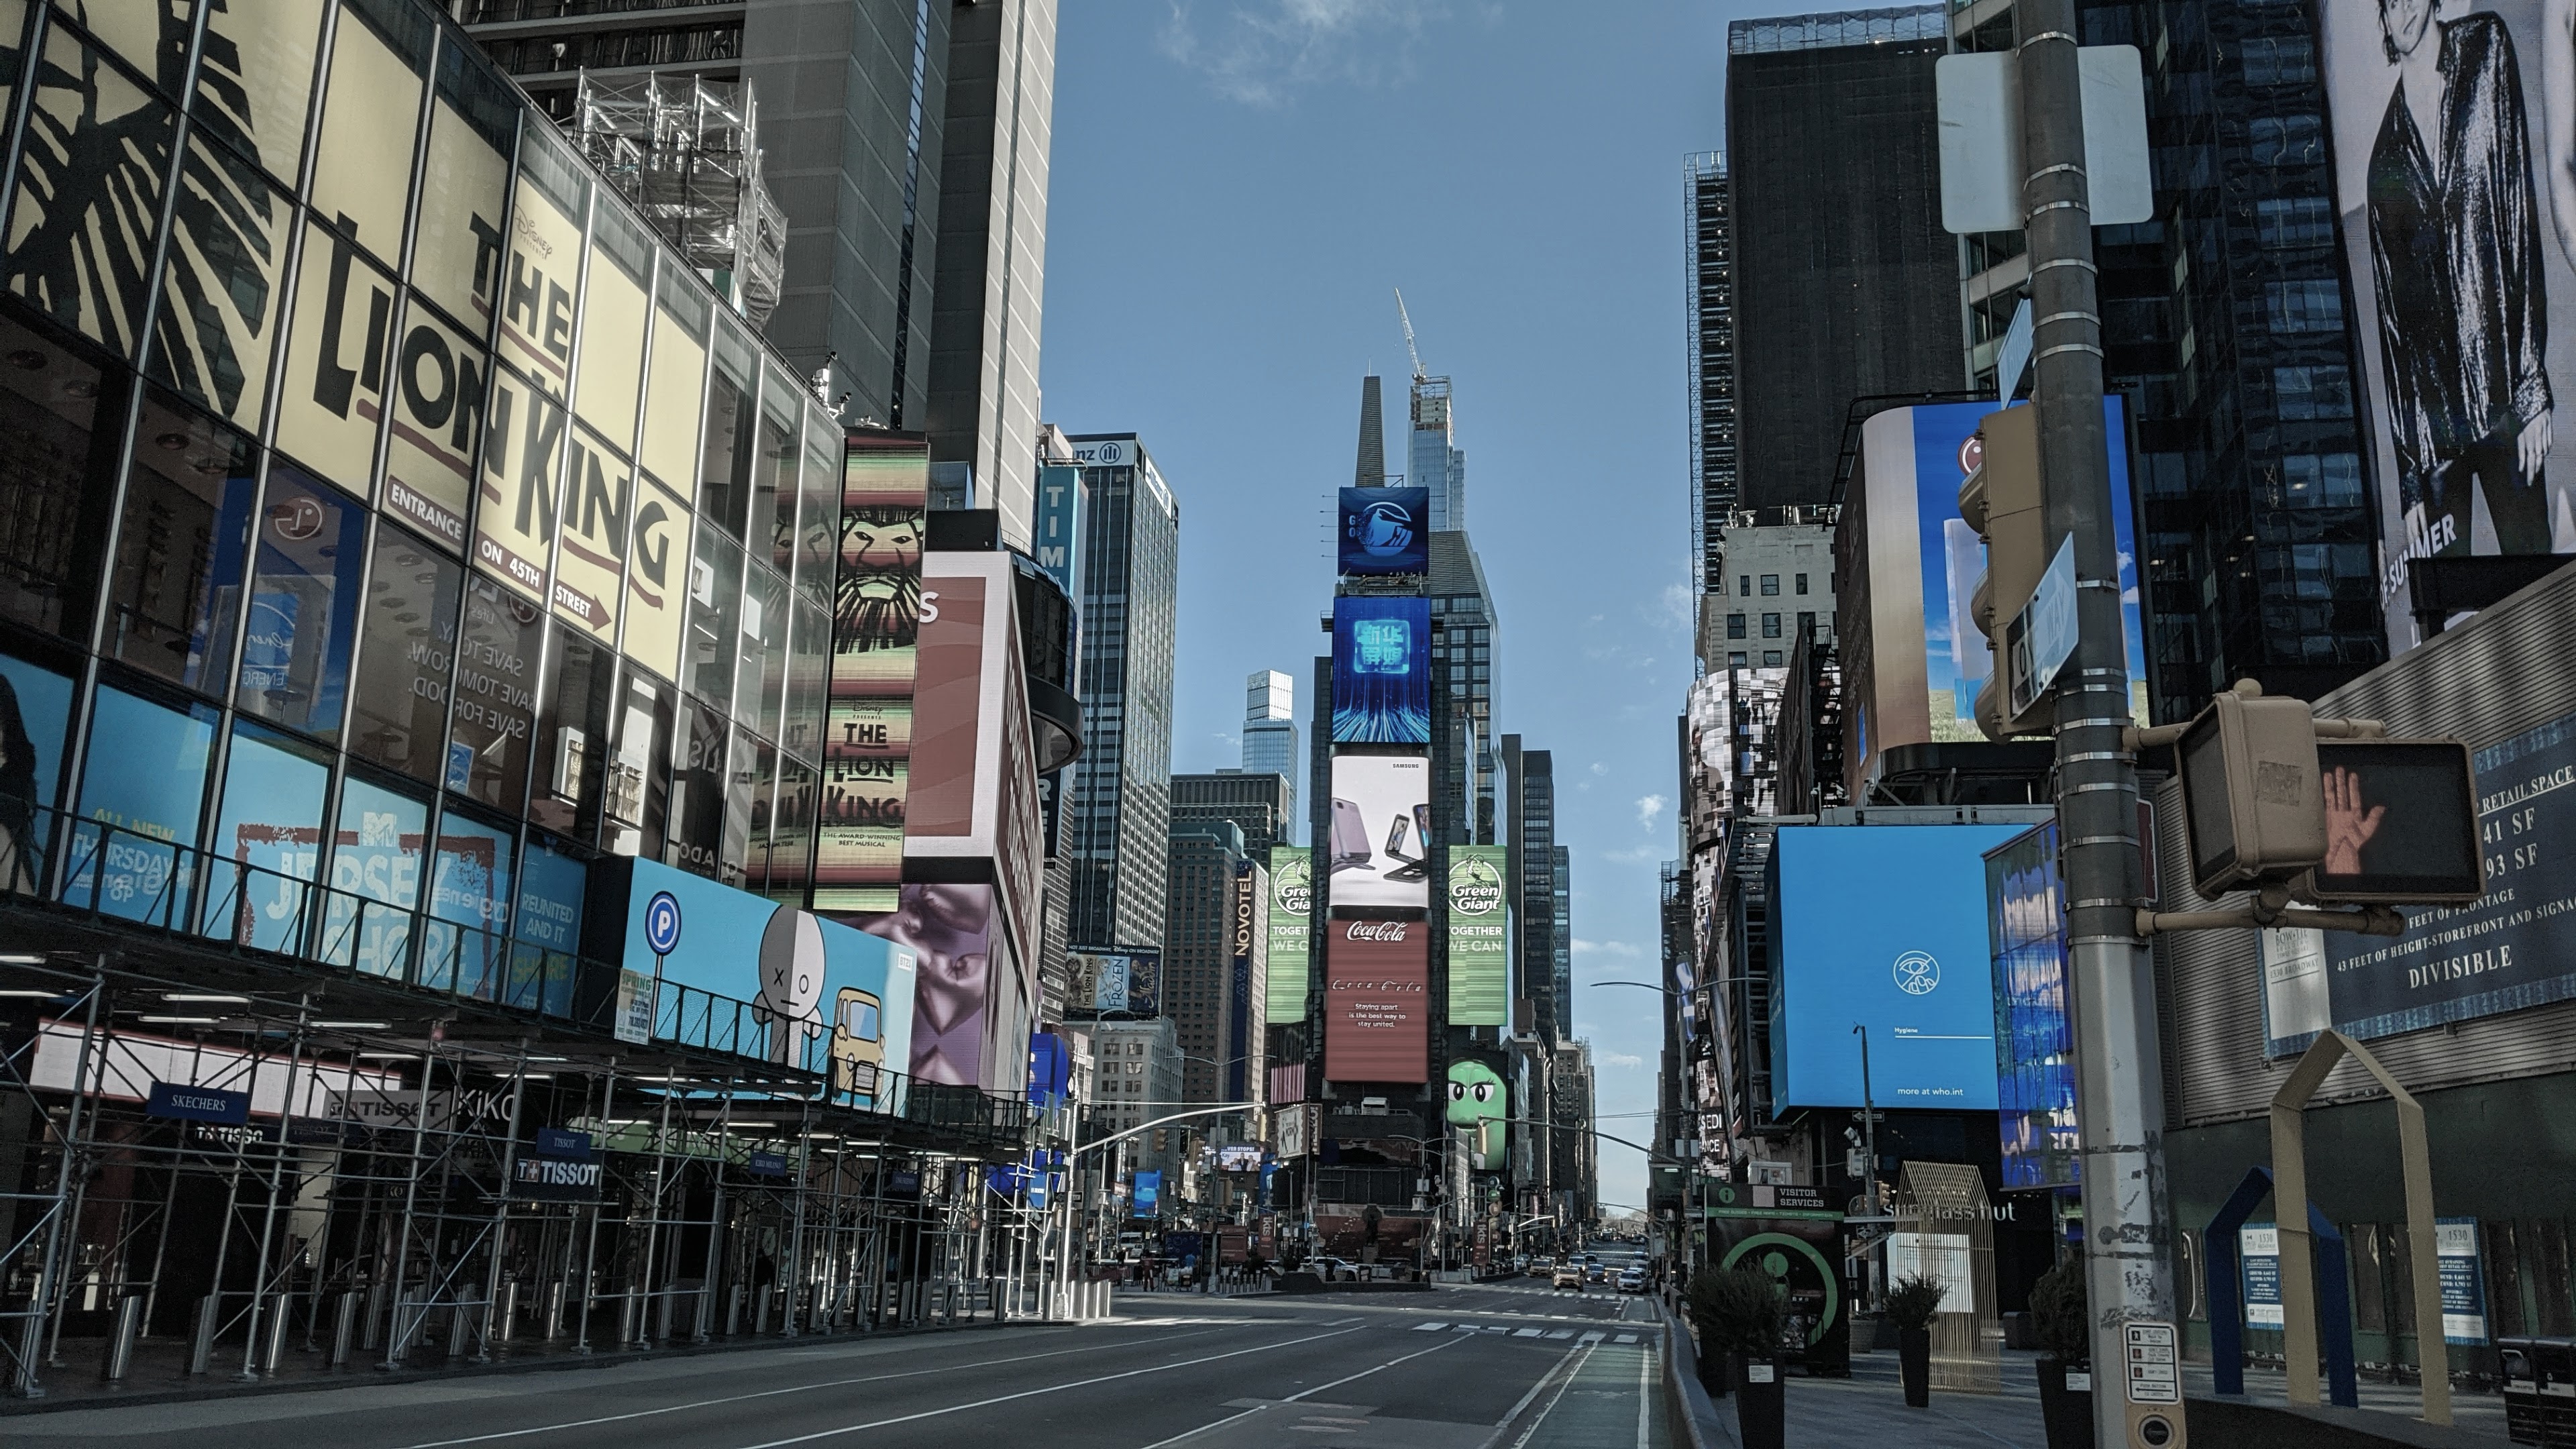 Empty Times Square, Covid Pandemic, March 2020, taken by Michael Makarov's Pixel 3.